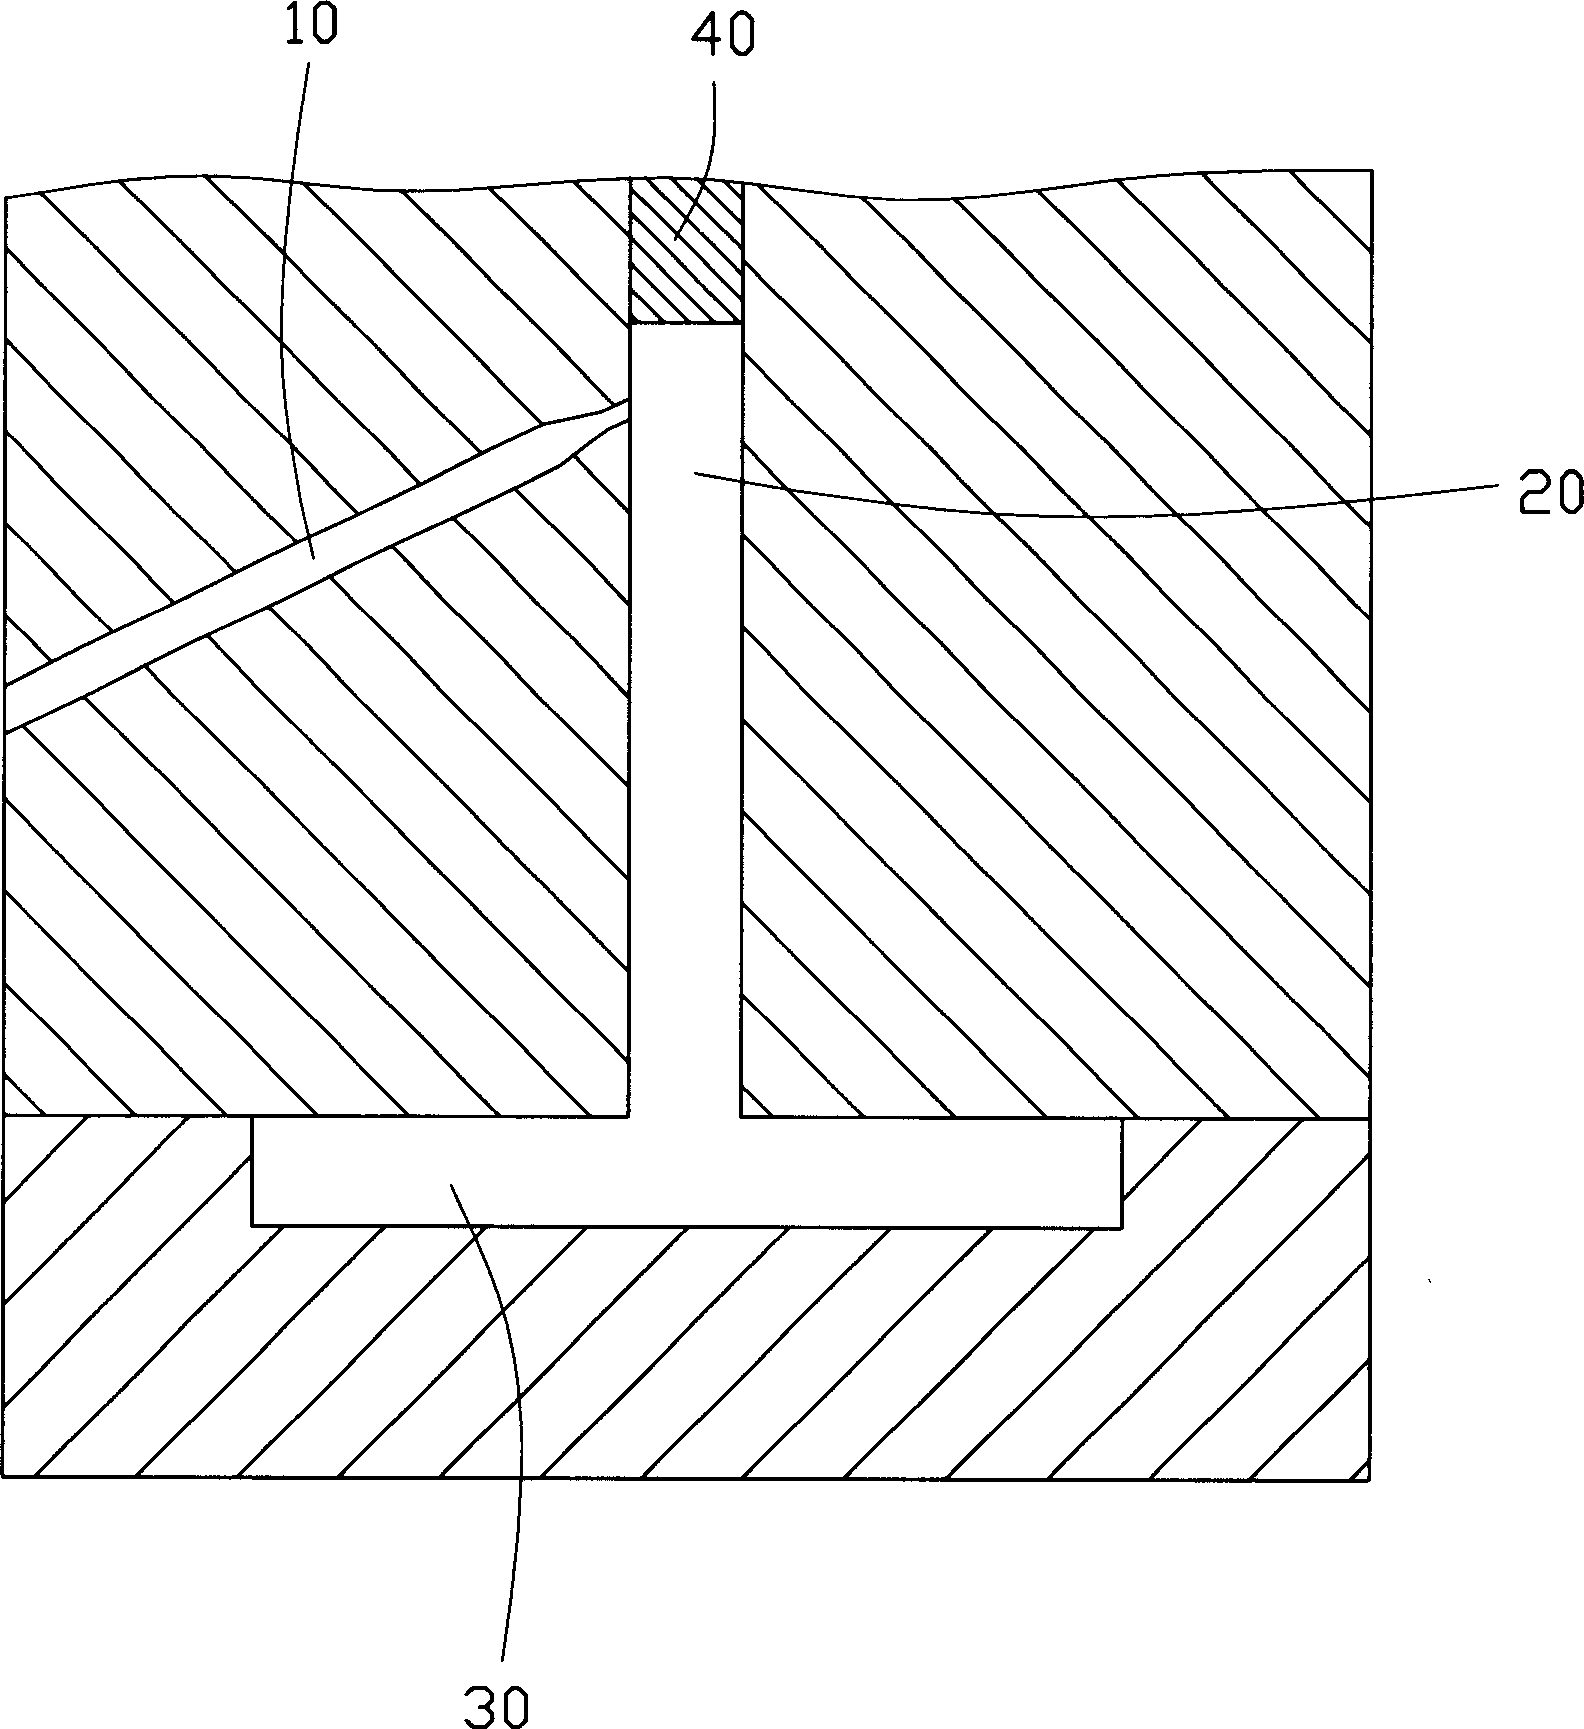 Feeding structure of die and die employing same